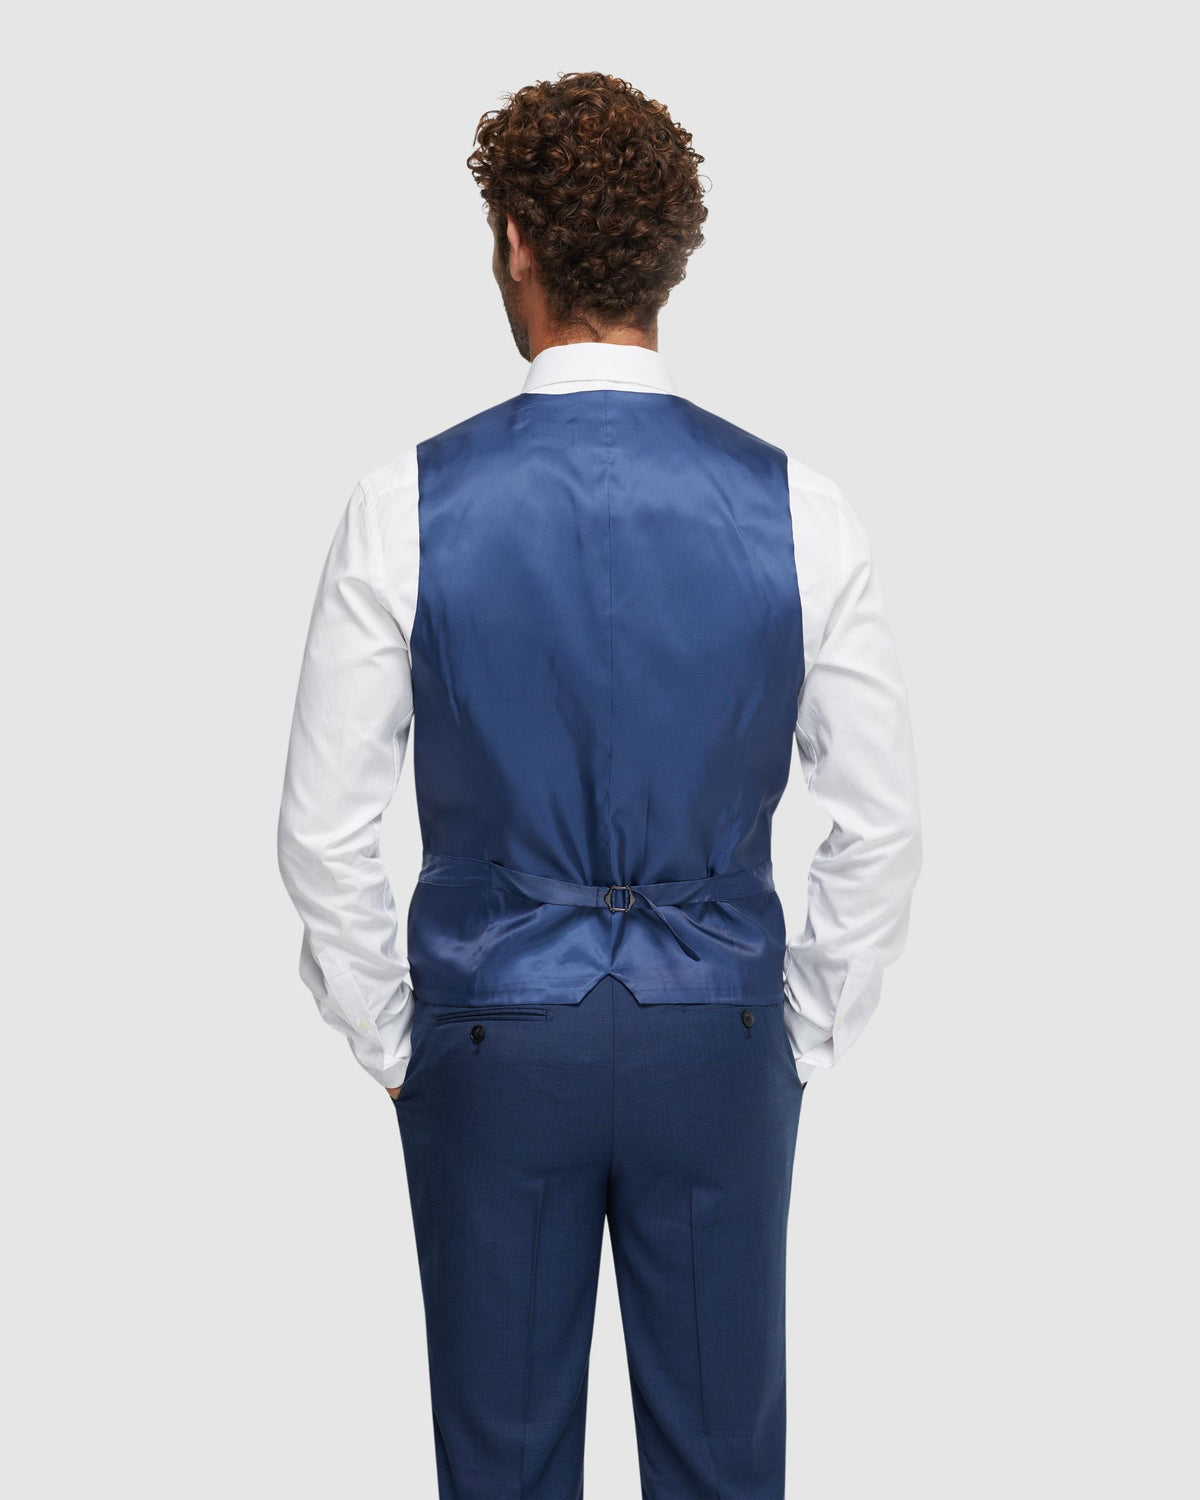 BUTTERWORTH WOOL SUIT WAISTCOAT - AVAILABLE ~ 1-2 weeks MENS JACKETS AND COATS